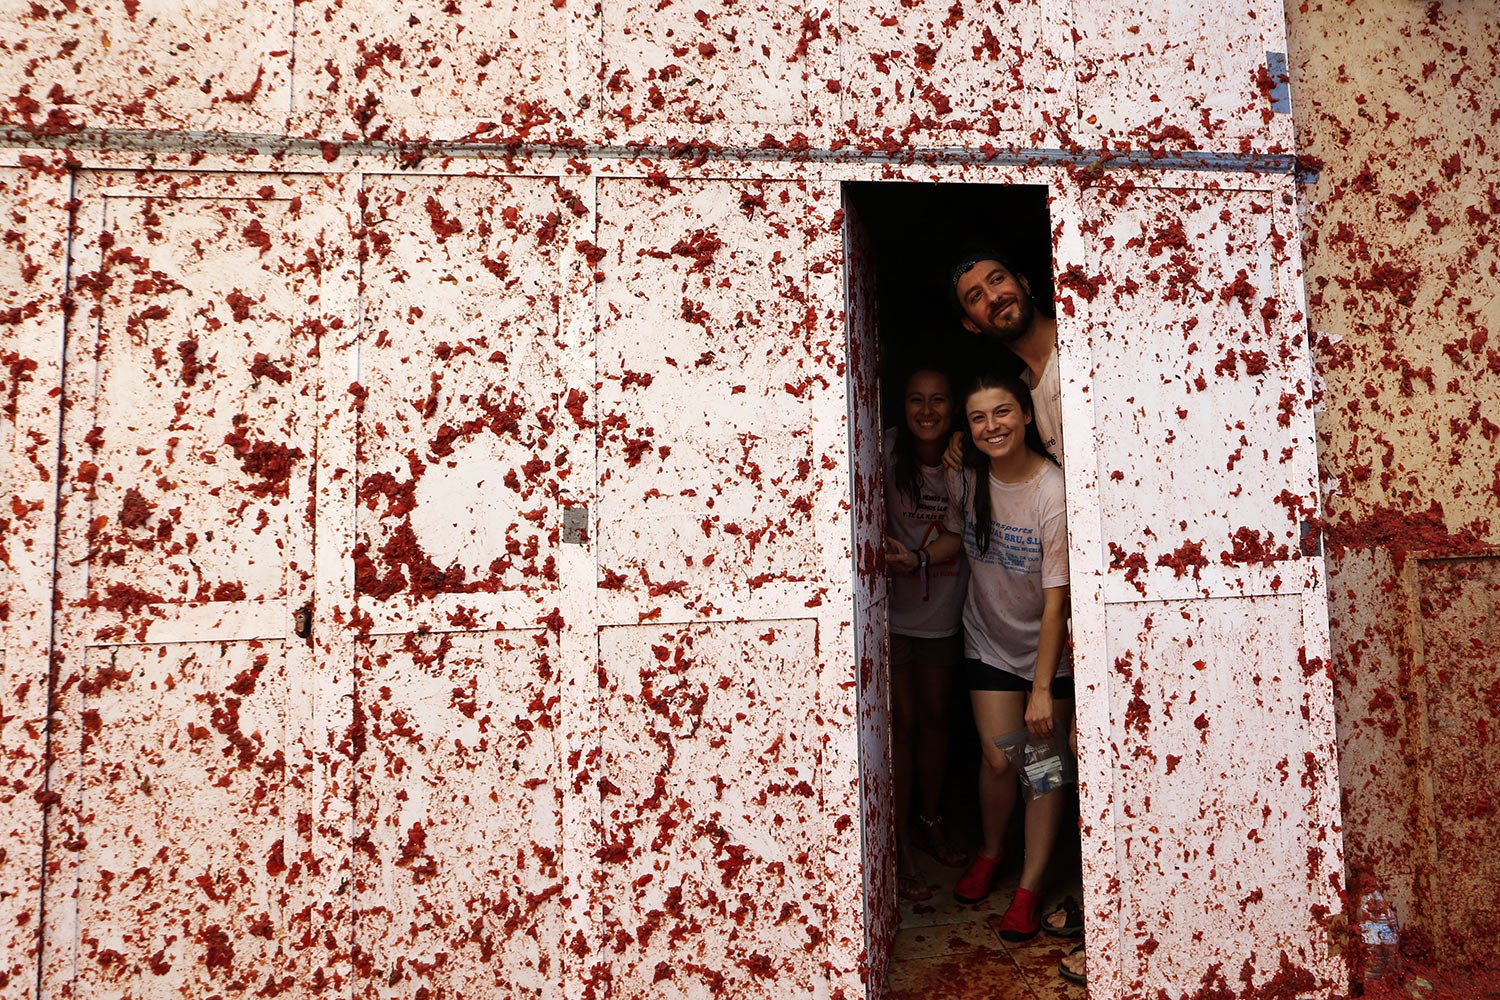  People peek out from inside a home whose facade is slathered with tomato pulp during the annual “Tomatina” festival, in Bunol, Spain, Wednesday, Aug. 30, 2023. (AP Photo/Alberto Saiz) 